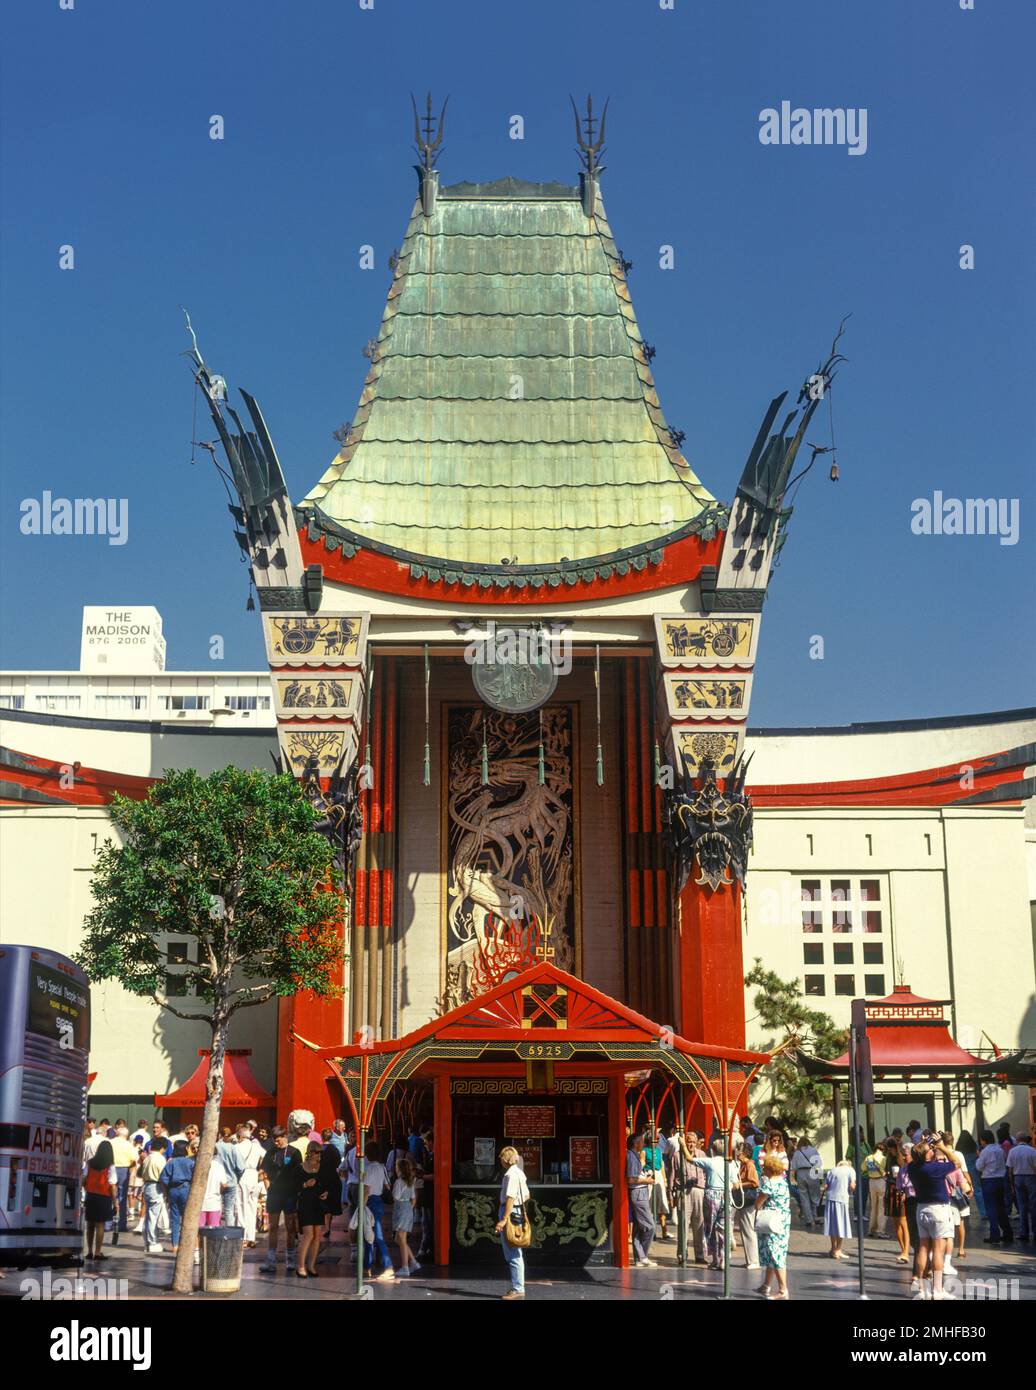 1990 HISTORIQUE GRAUMAN'S CHINESE THEATRE (©MAYER & HOLLER 1927) WALK OF FAME HOLLYWOOD BOULEVARD LOS ANGELES CALIFORNIA USA Banque D'Images